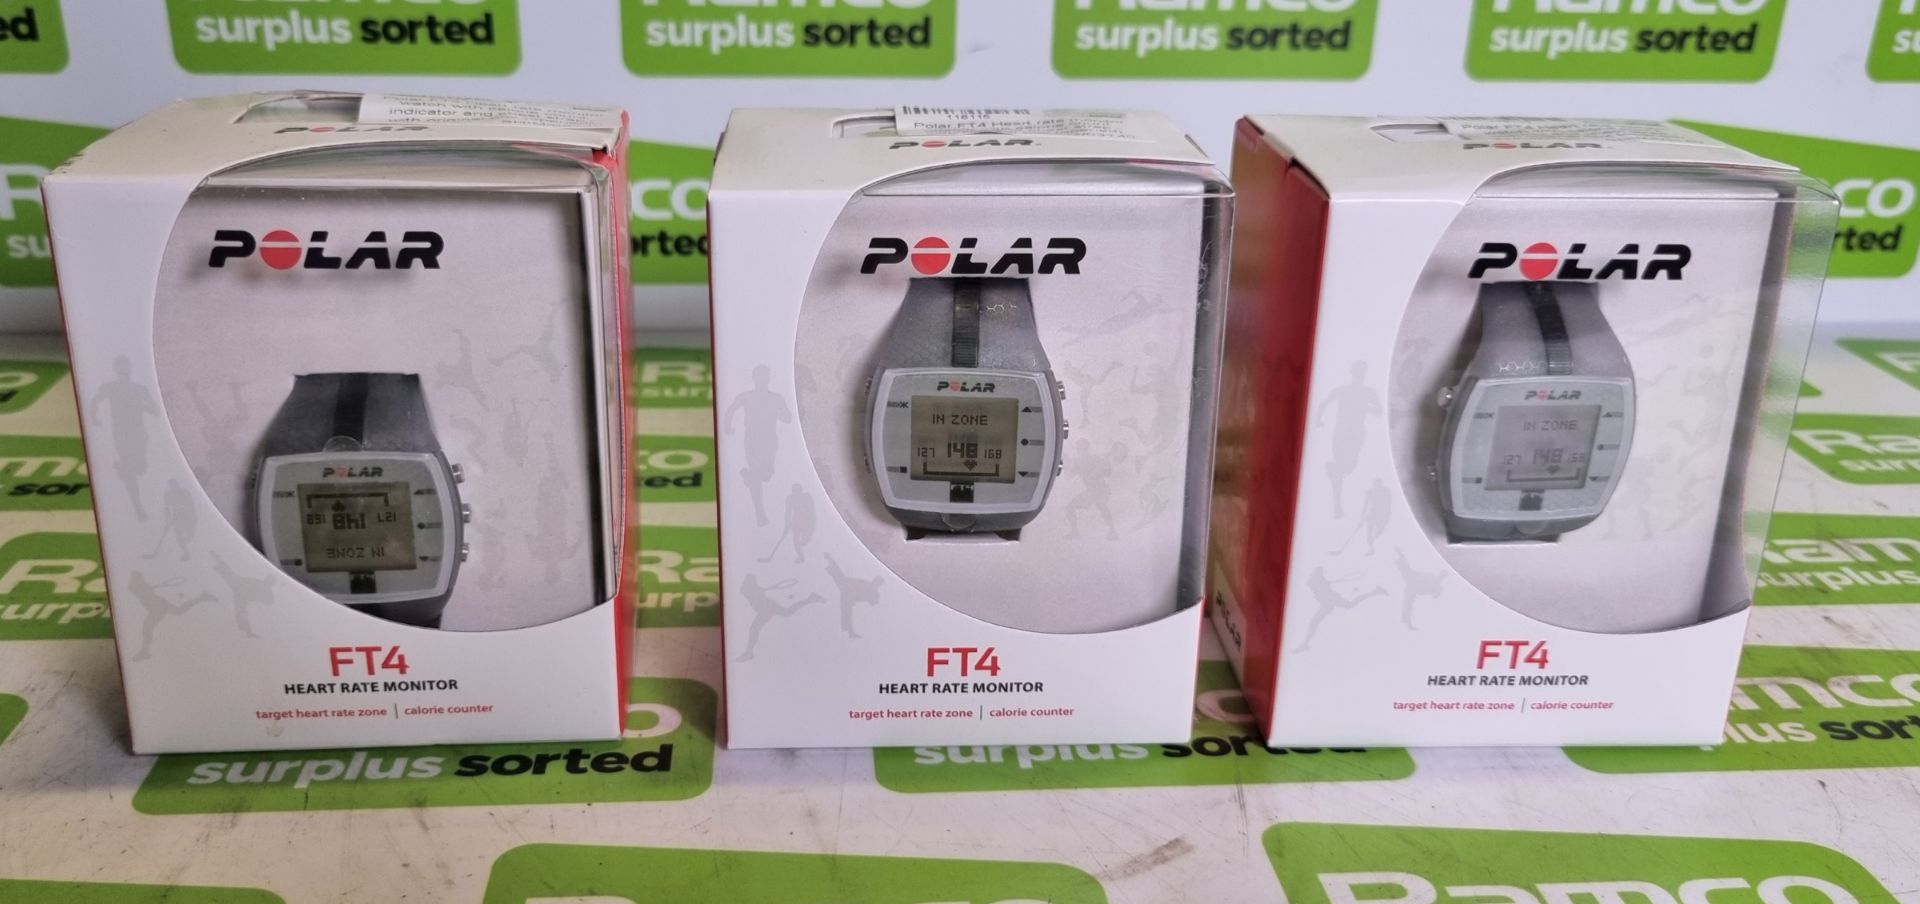 3x Polar FT4 Heart rate monitor watches with calorie count indicator and chest strap